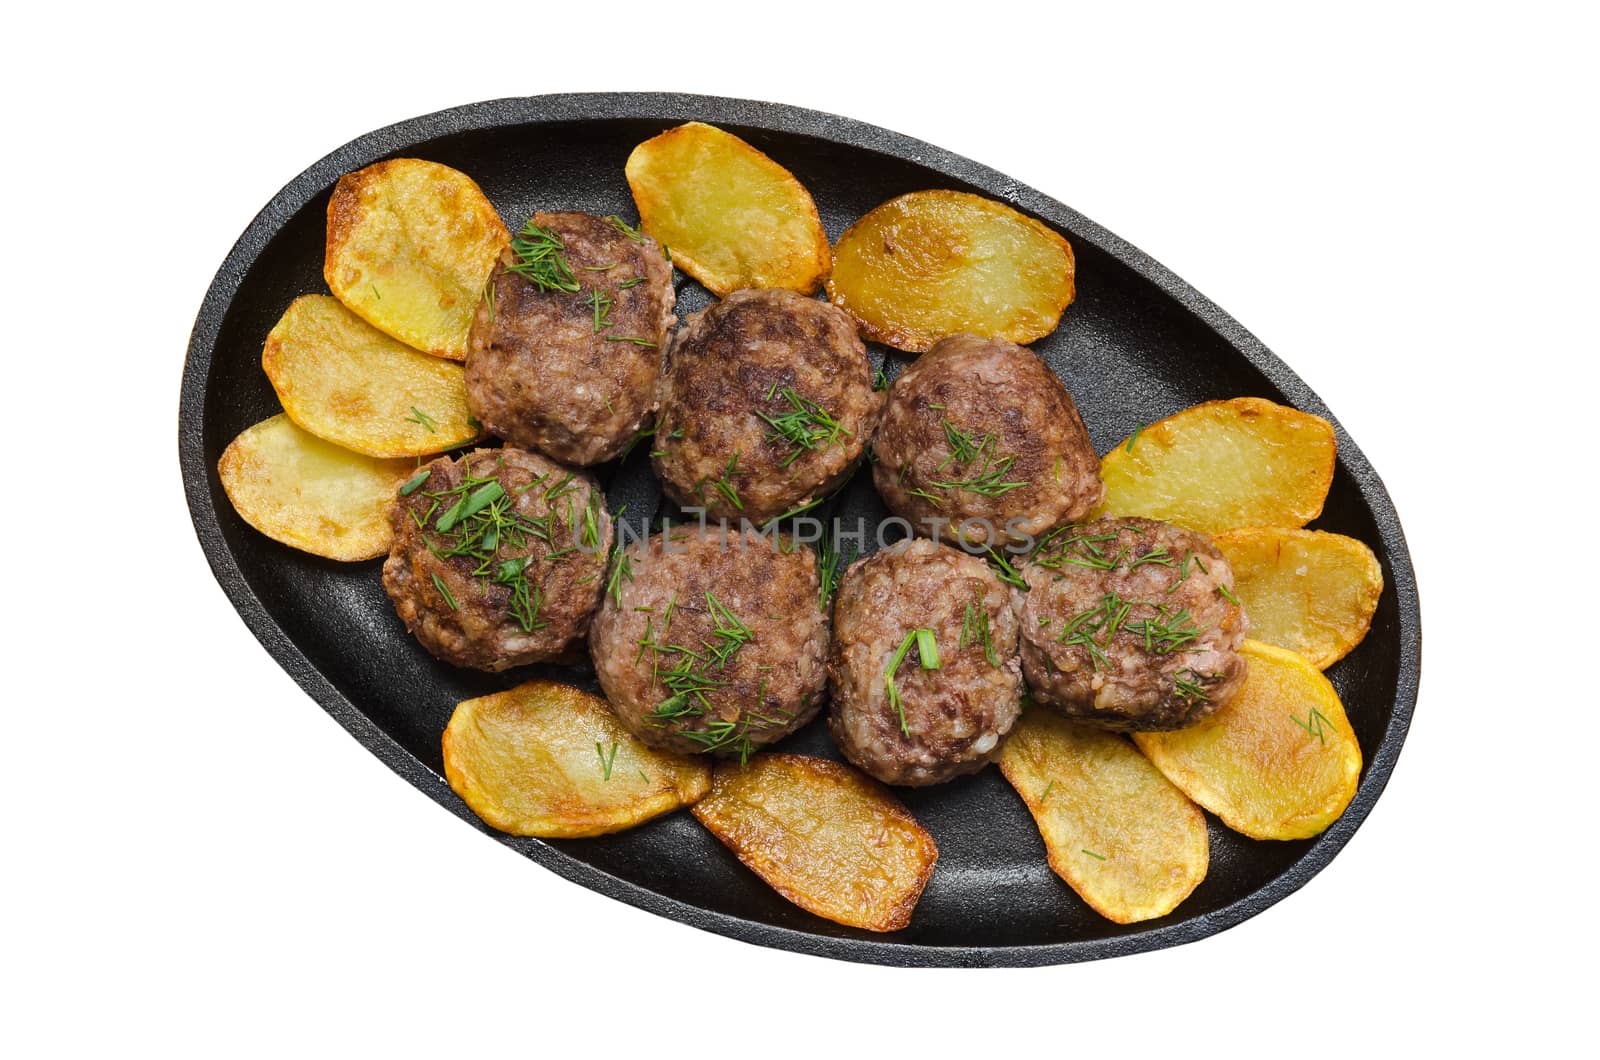 Fried meatballs with rice and French fries in a cast iron pan isolated on white background.